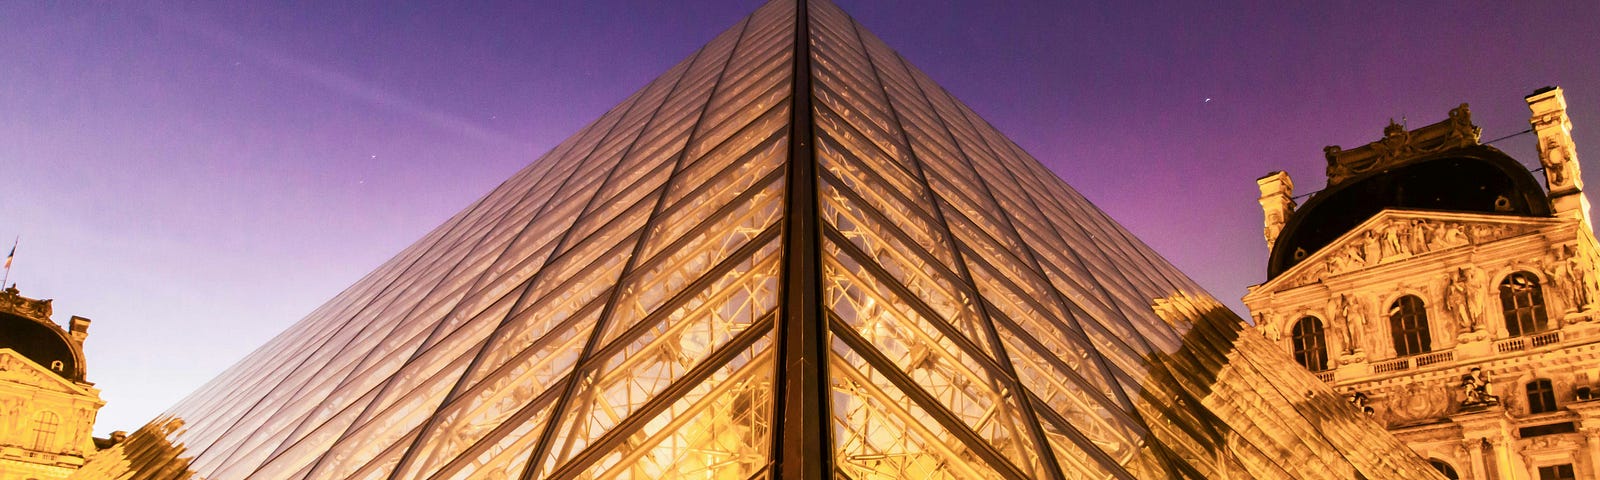 the glass pyramid at The Louvre in Paris